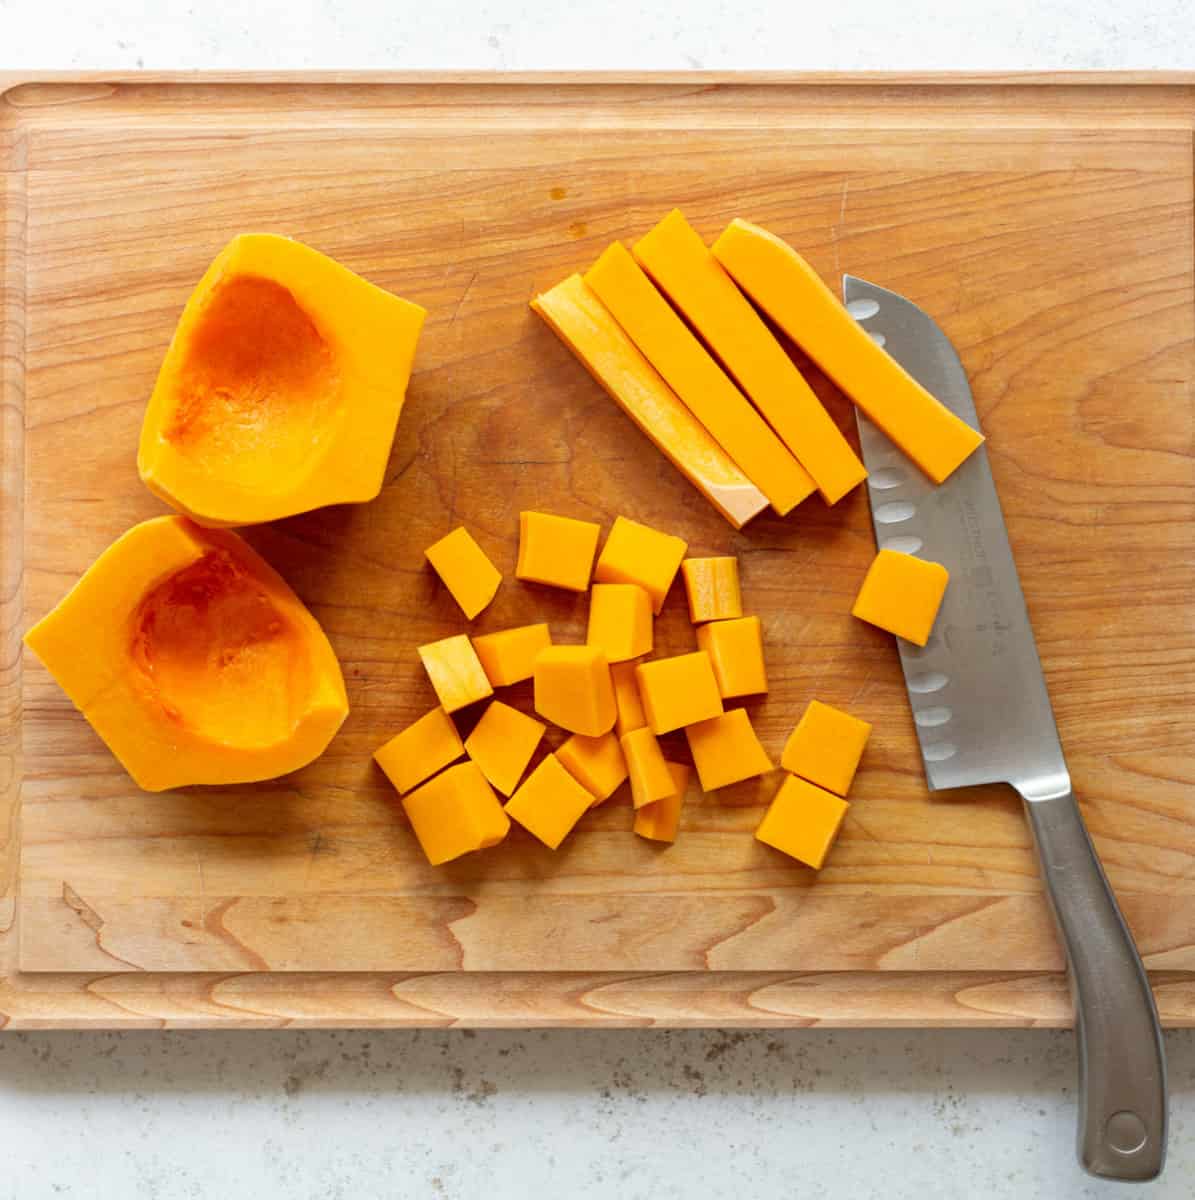 Savory Mashed Butternut Squash (Dairy-Free!) « Clean & Delicious